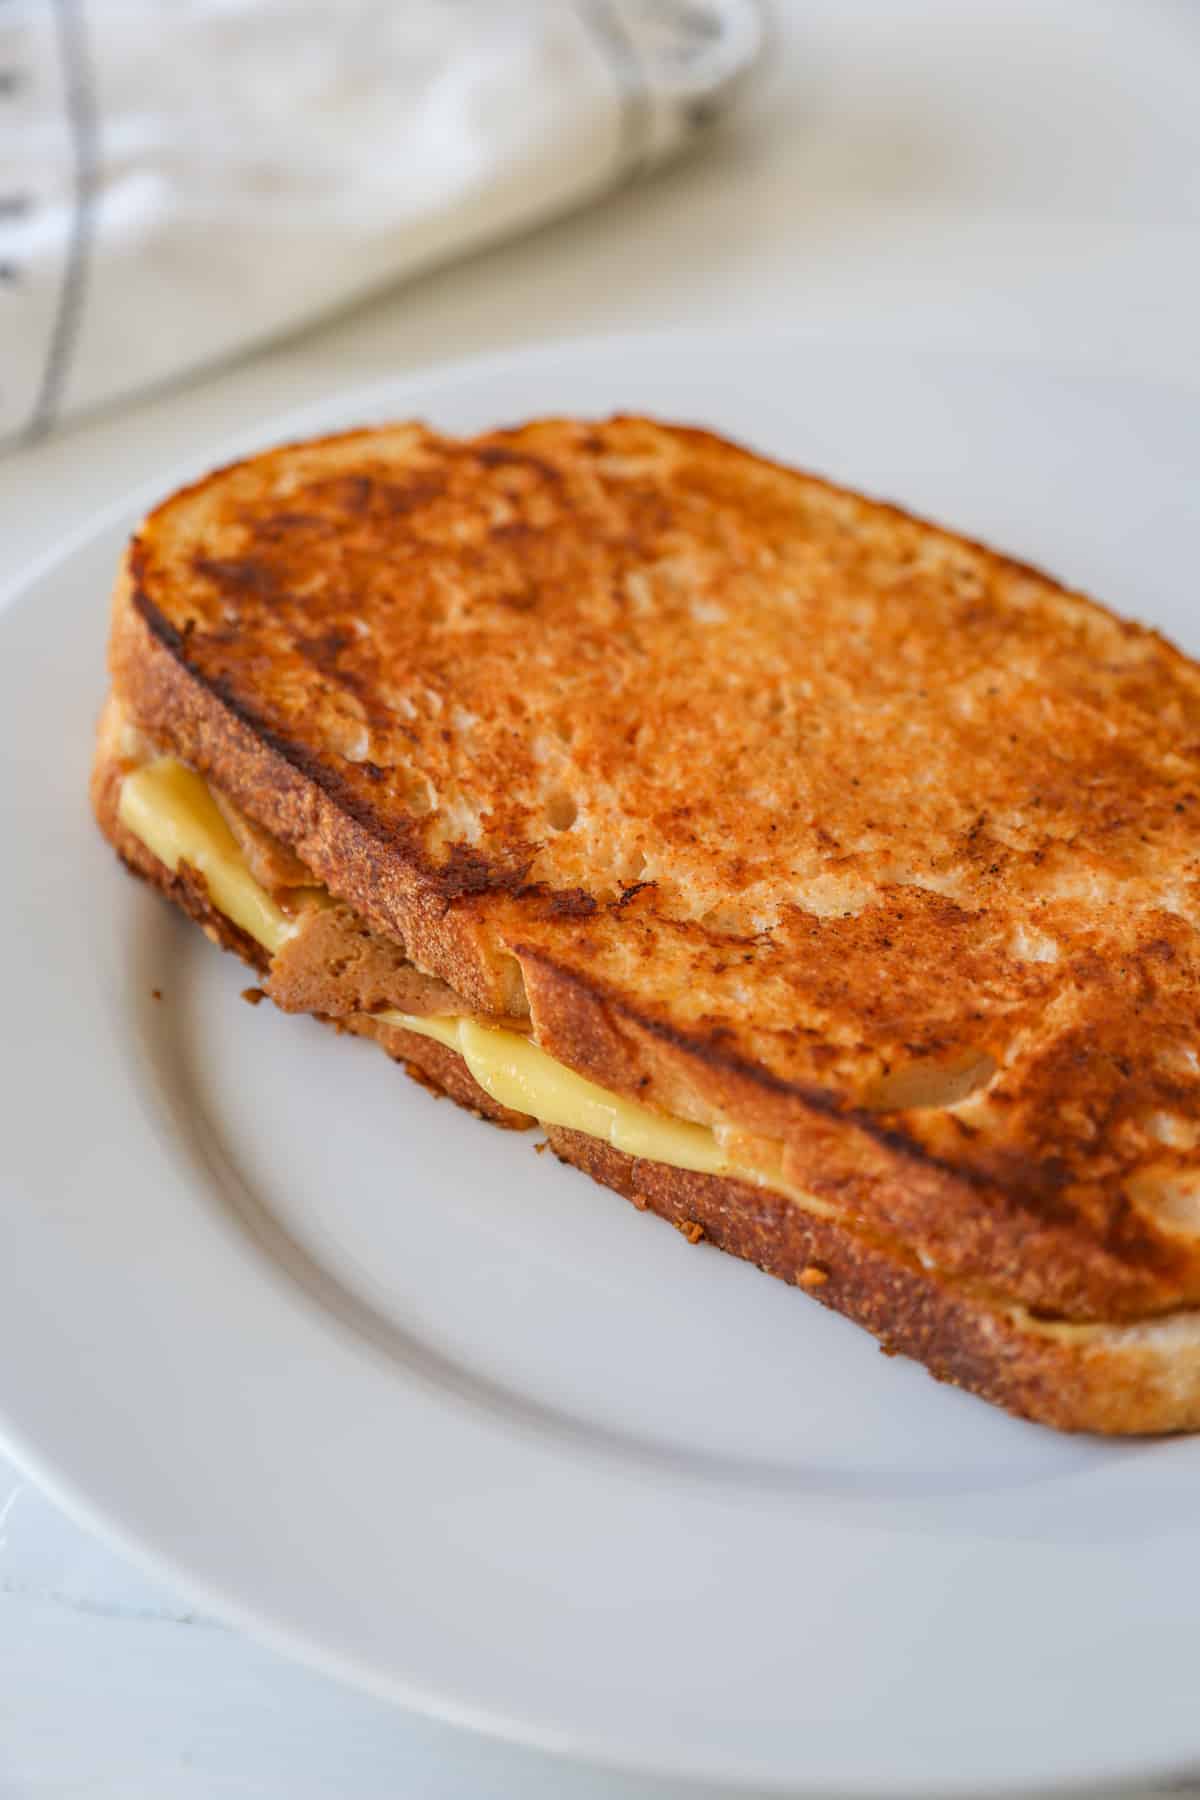 A monte cristo ham and cheese grilled sandwich on a white plate.